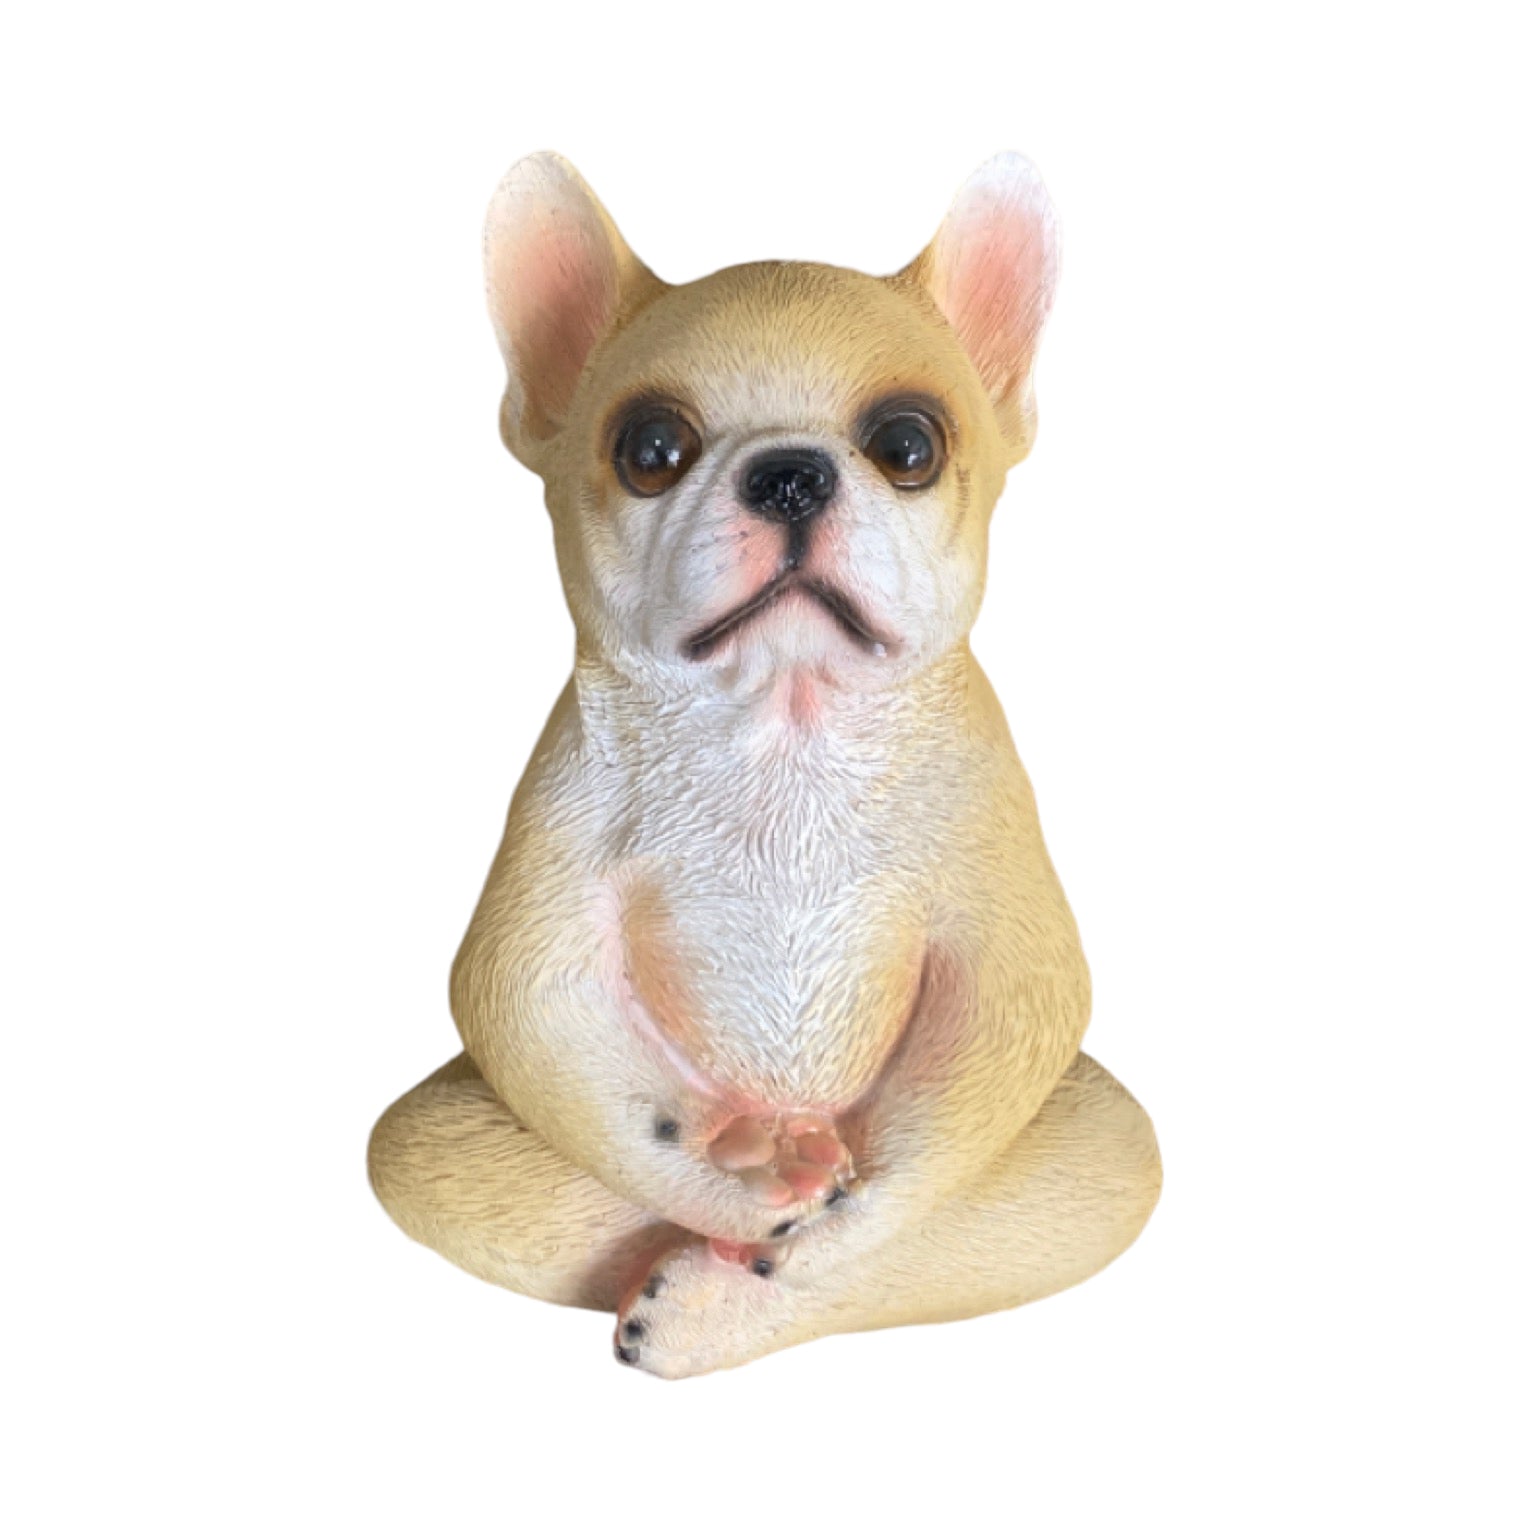 Dog Yoga Meditation Zen Ornament - The Renmy Store Homewares & Gifts 